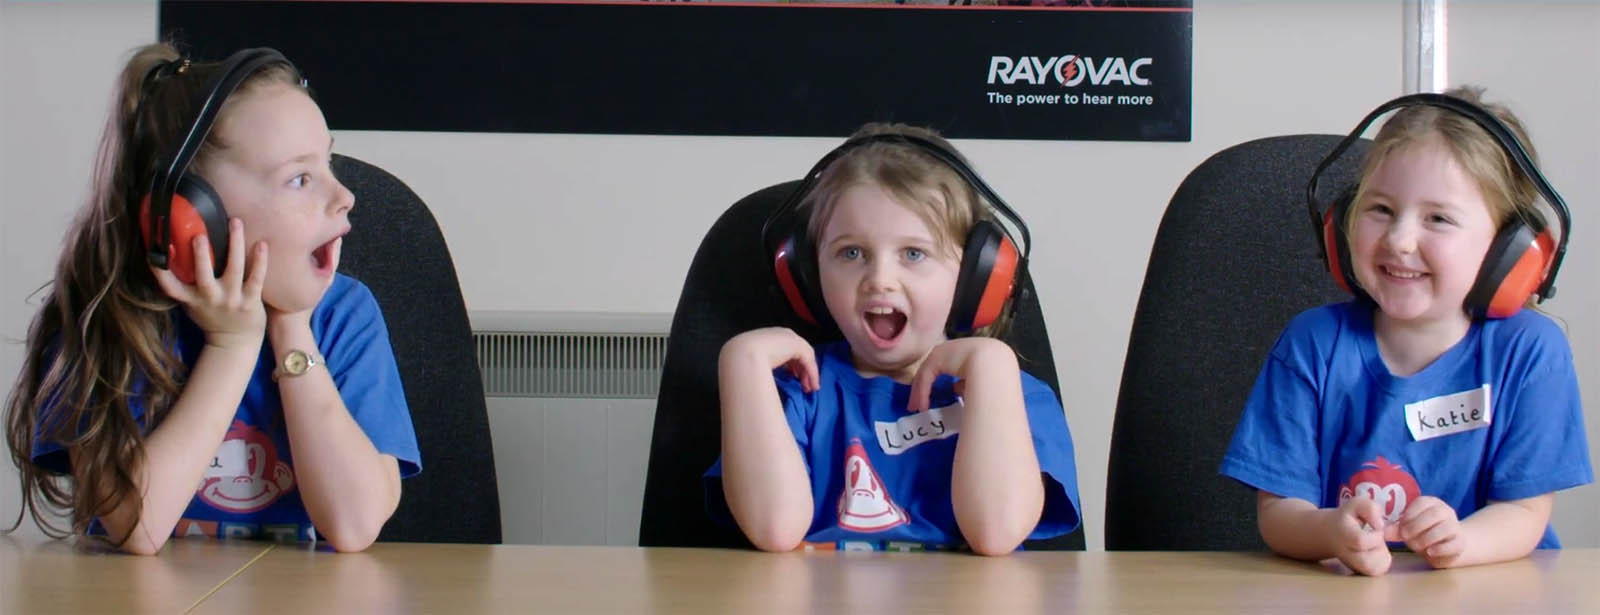 Rayovac supports World Hearing Day 2019 with hearing protection education for children